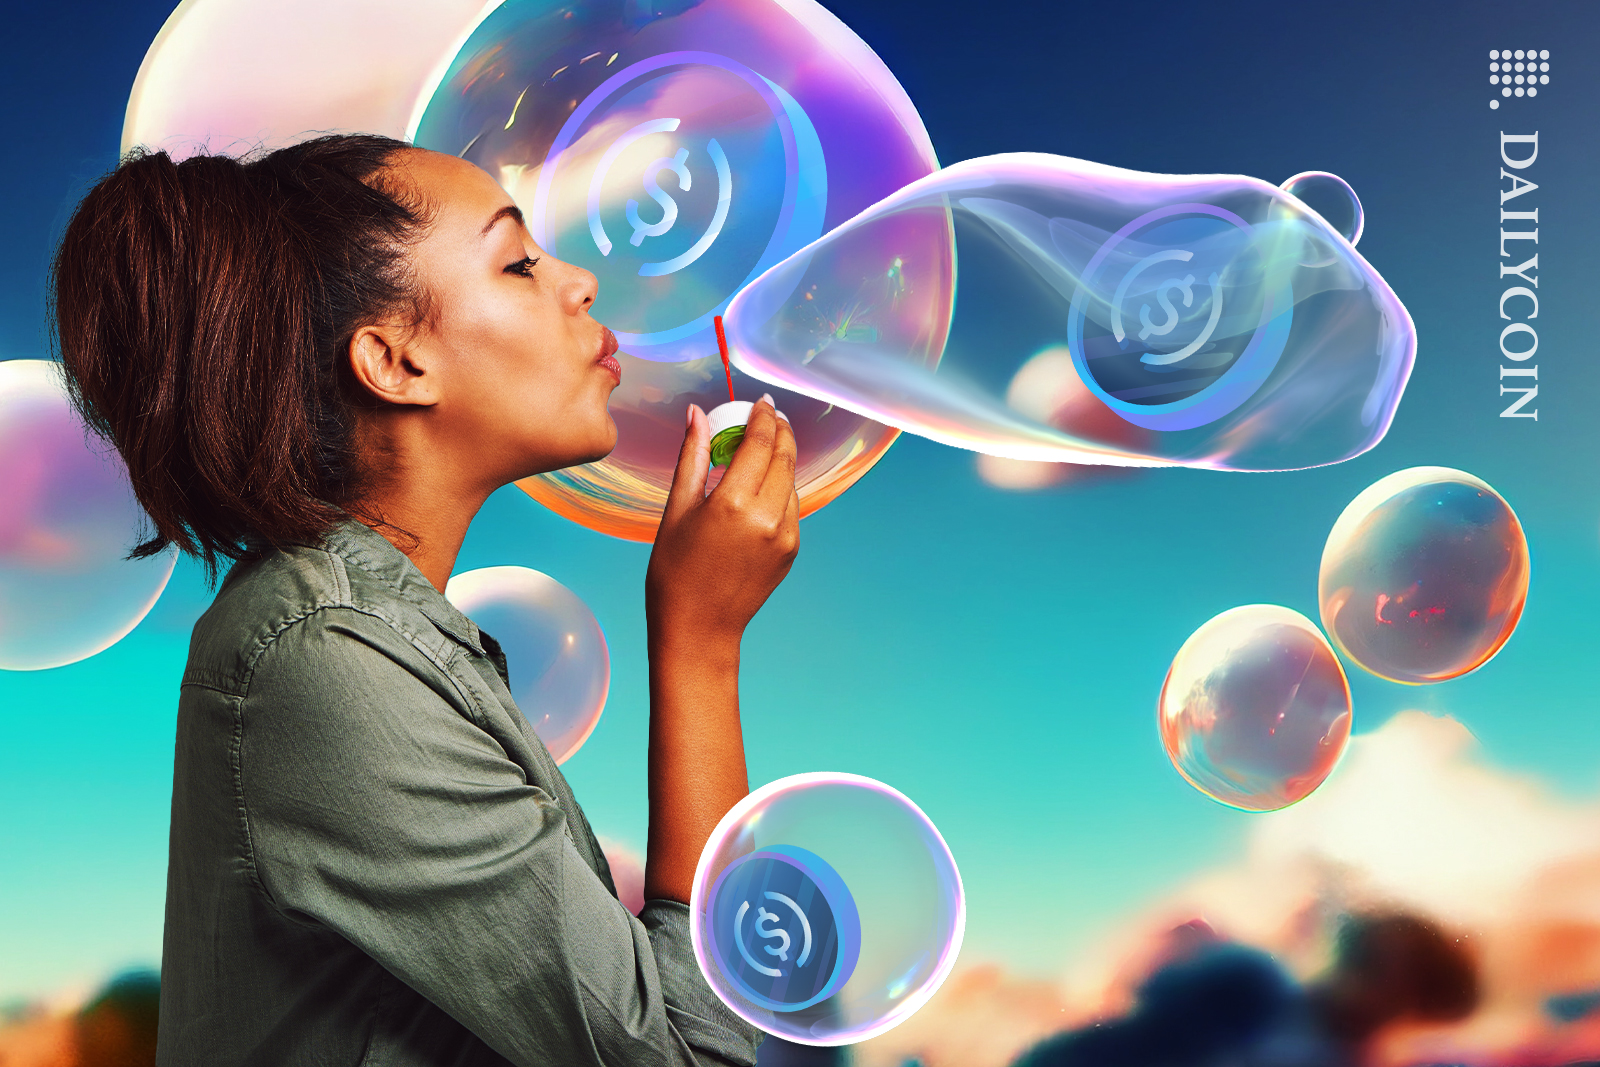 Girl blowing bubbles with Circle USD inside.